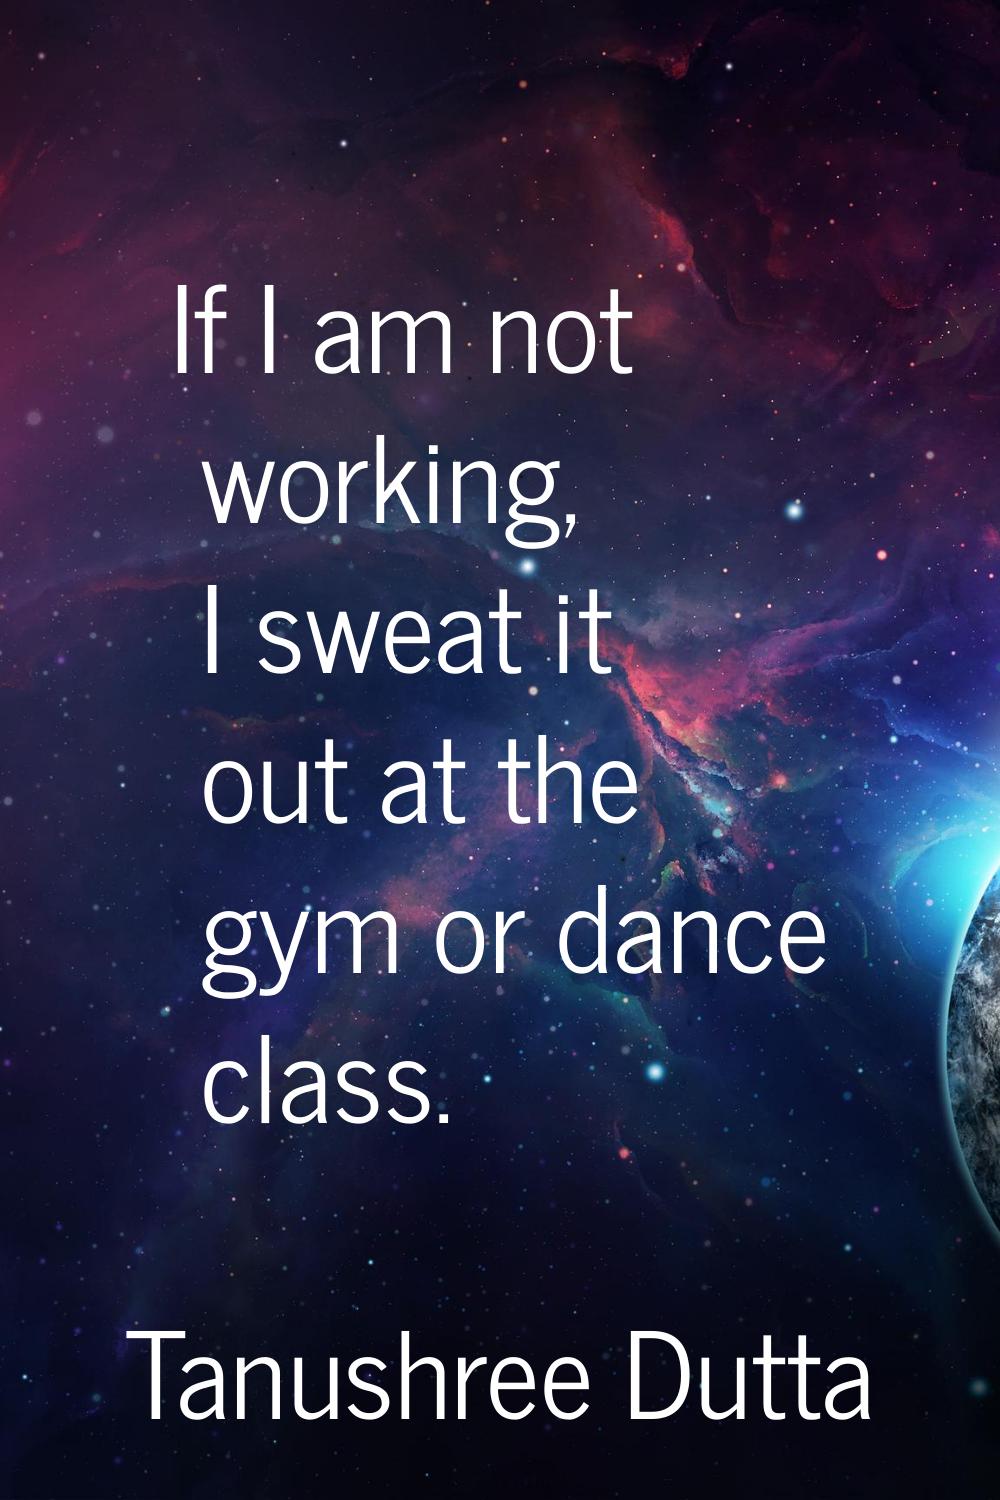 If I am not working, I sweat it out at the gym or dance class.